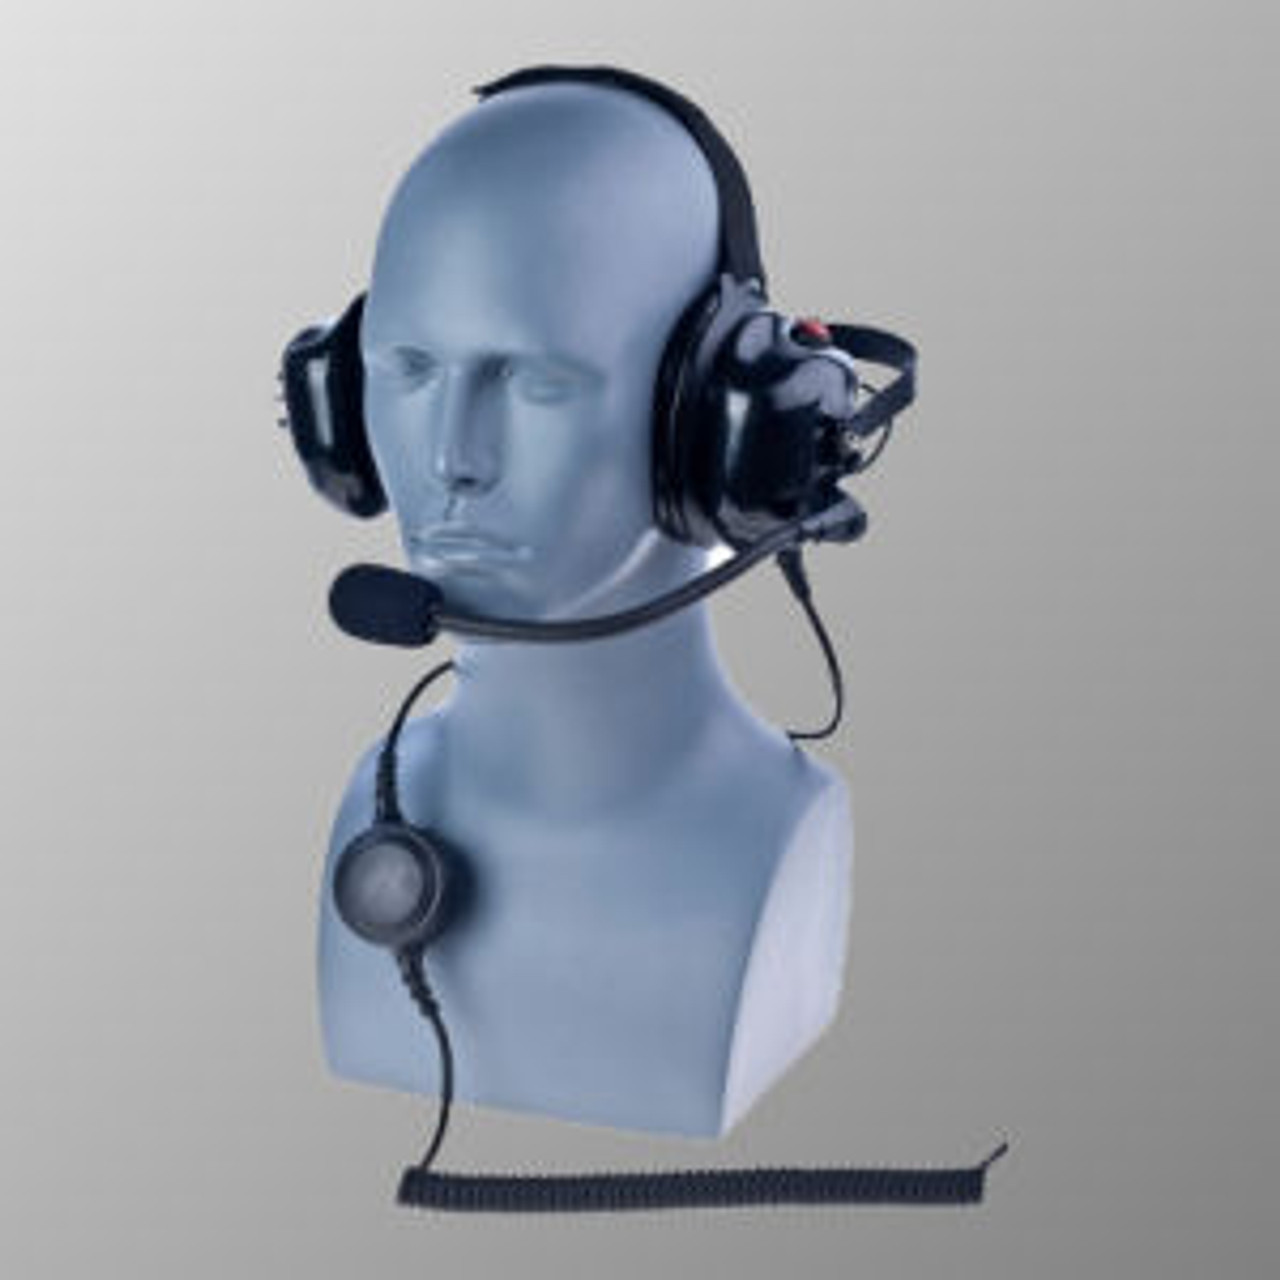 EF Johnson 51SL Noise Canceling Behind The Head Double Muff Headset